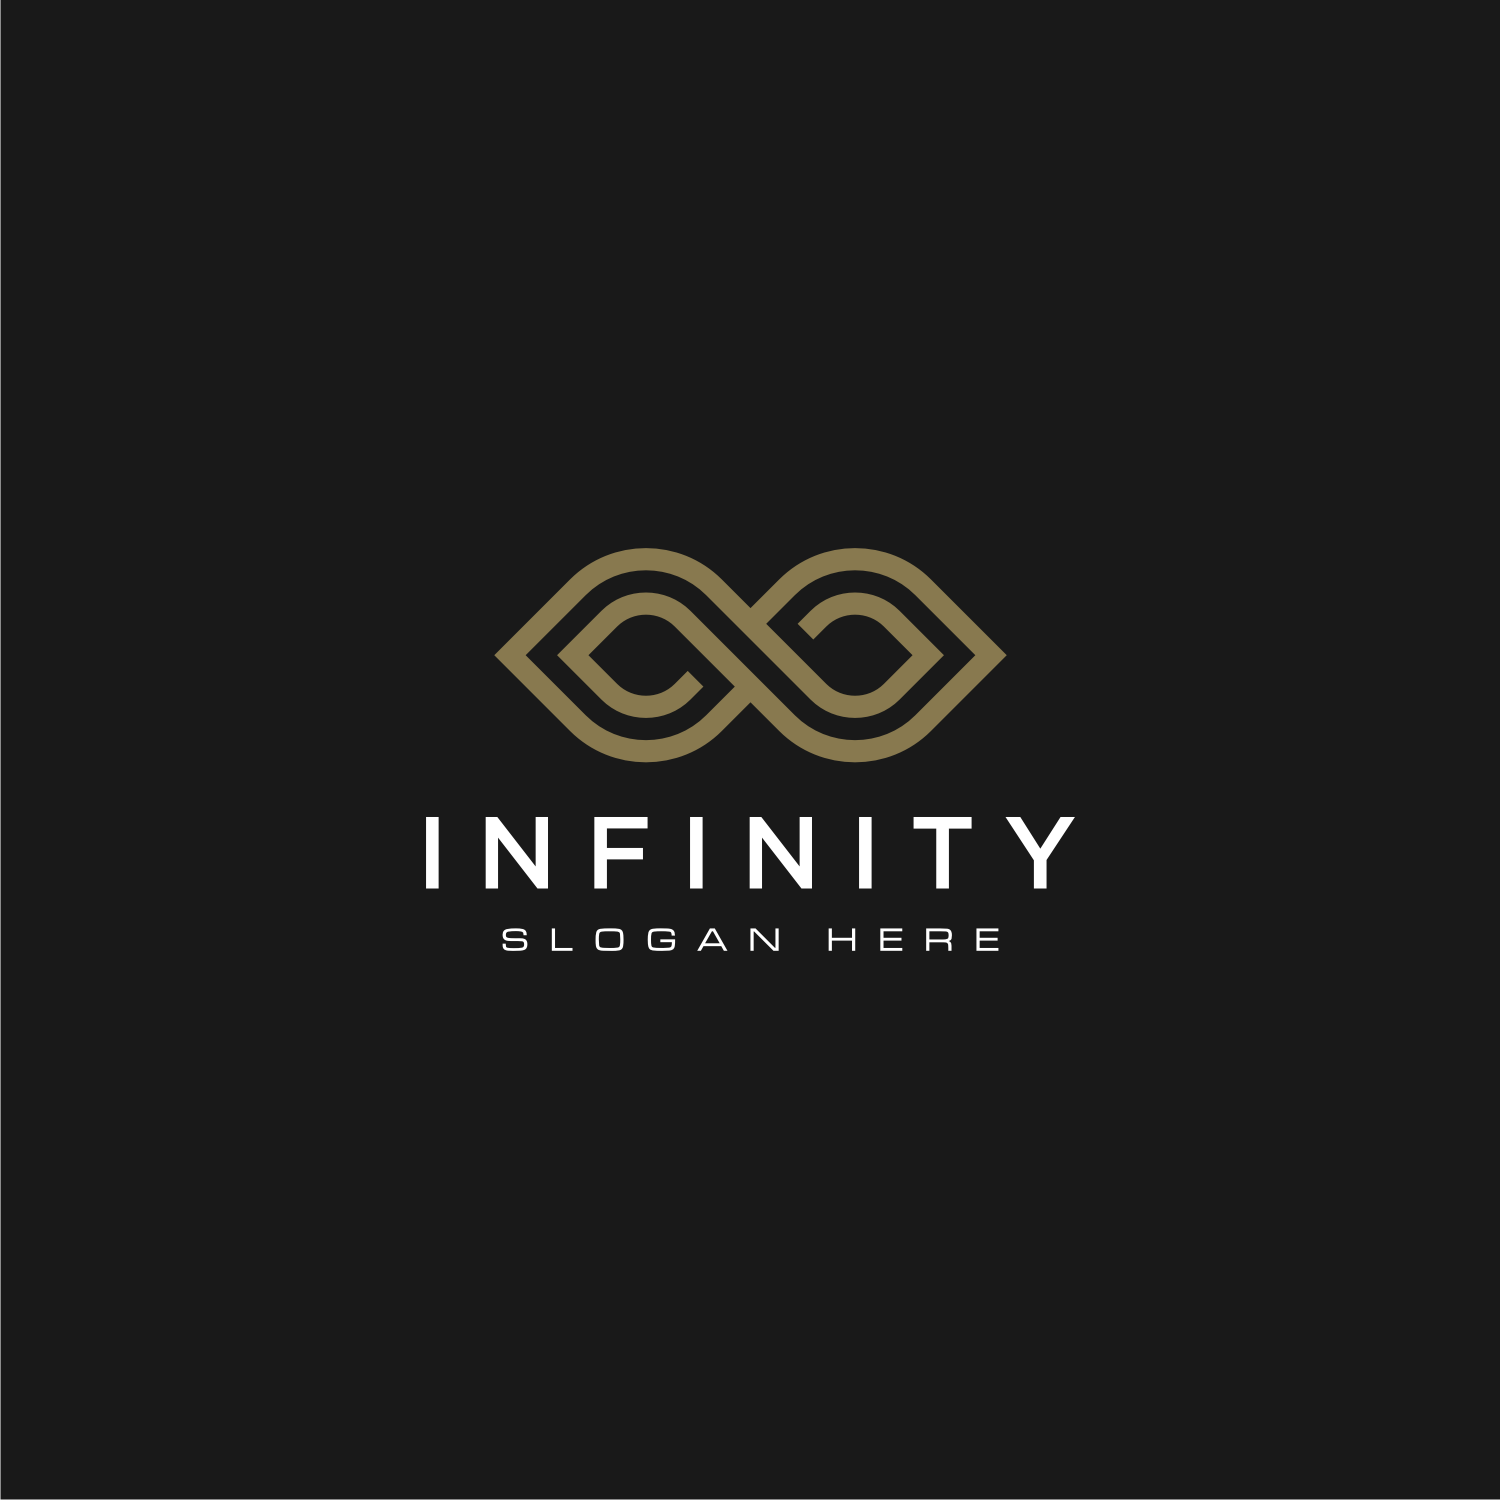 Infinity Loop With Line Art Style Symbol.